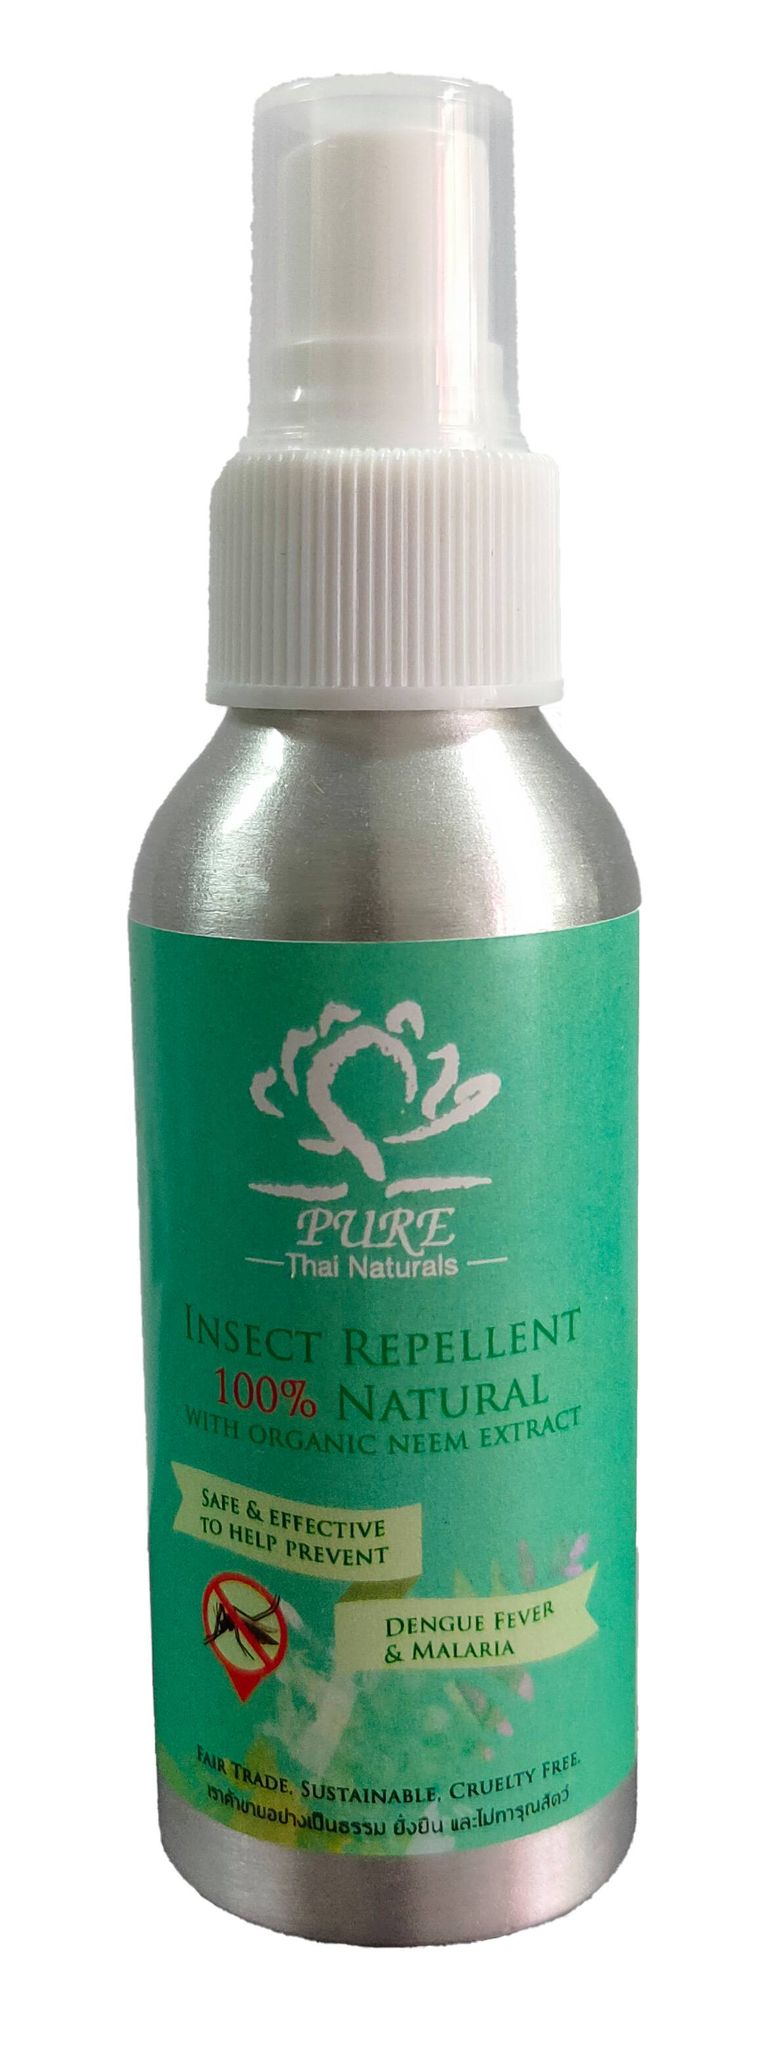 Insect Repellent 100% Natural 100ml Spray